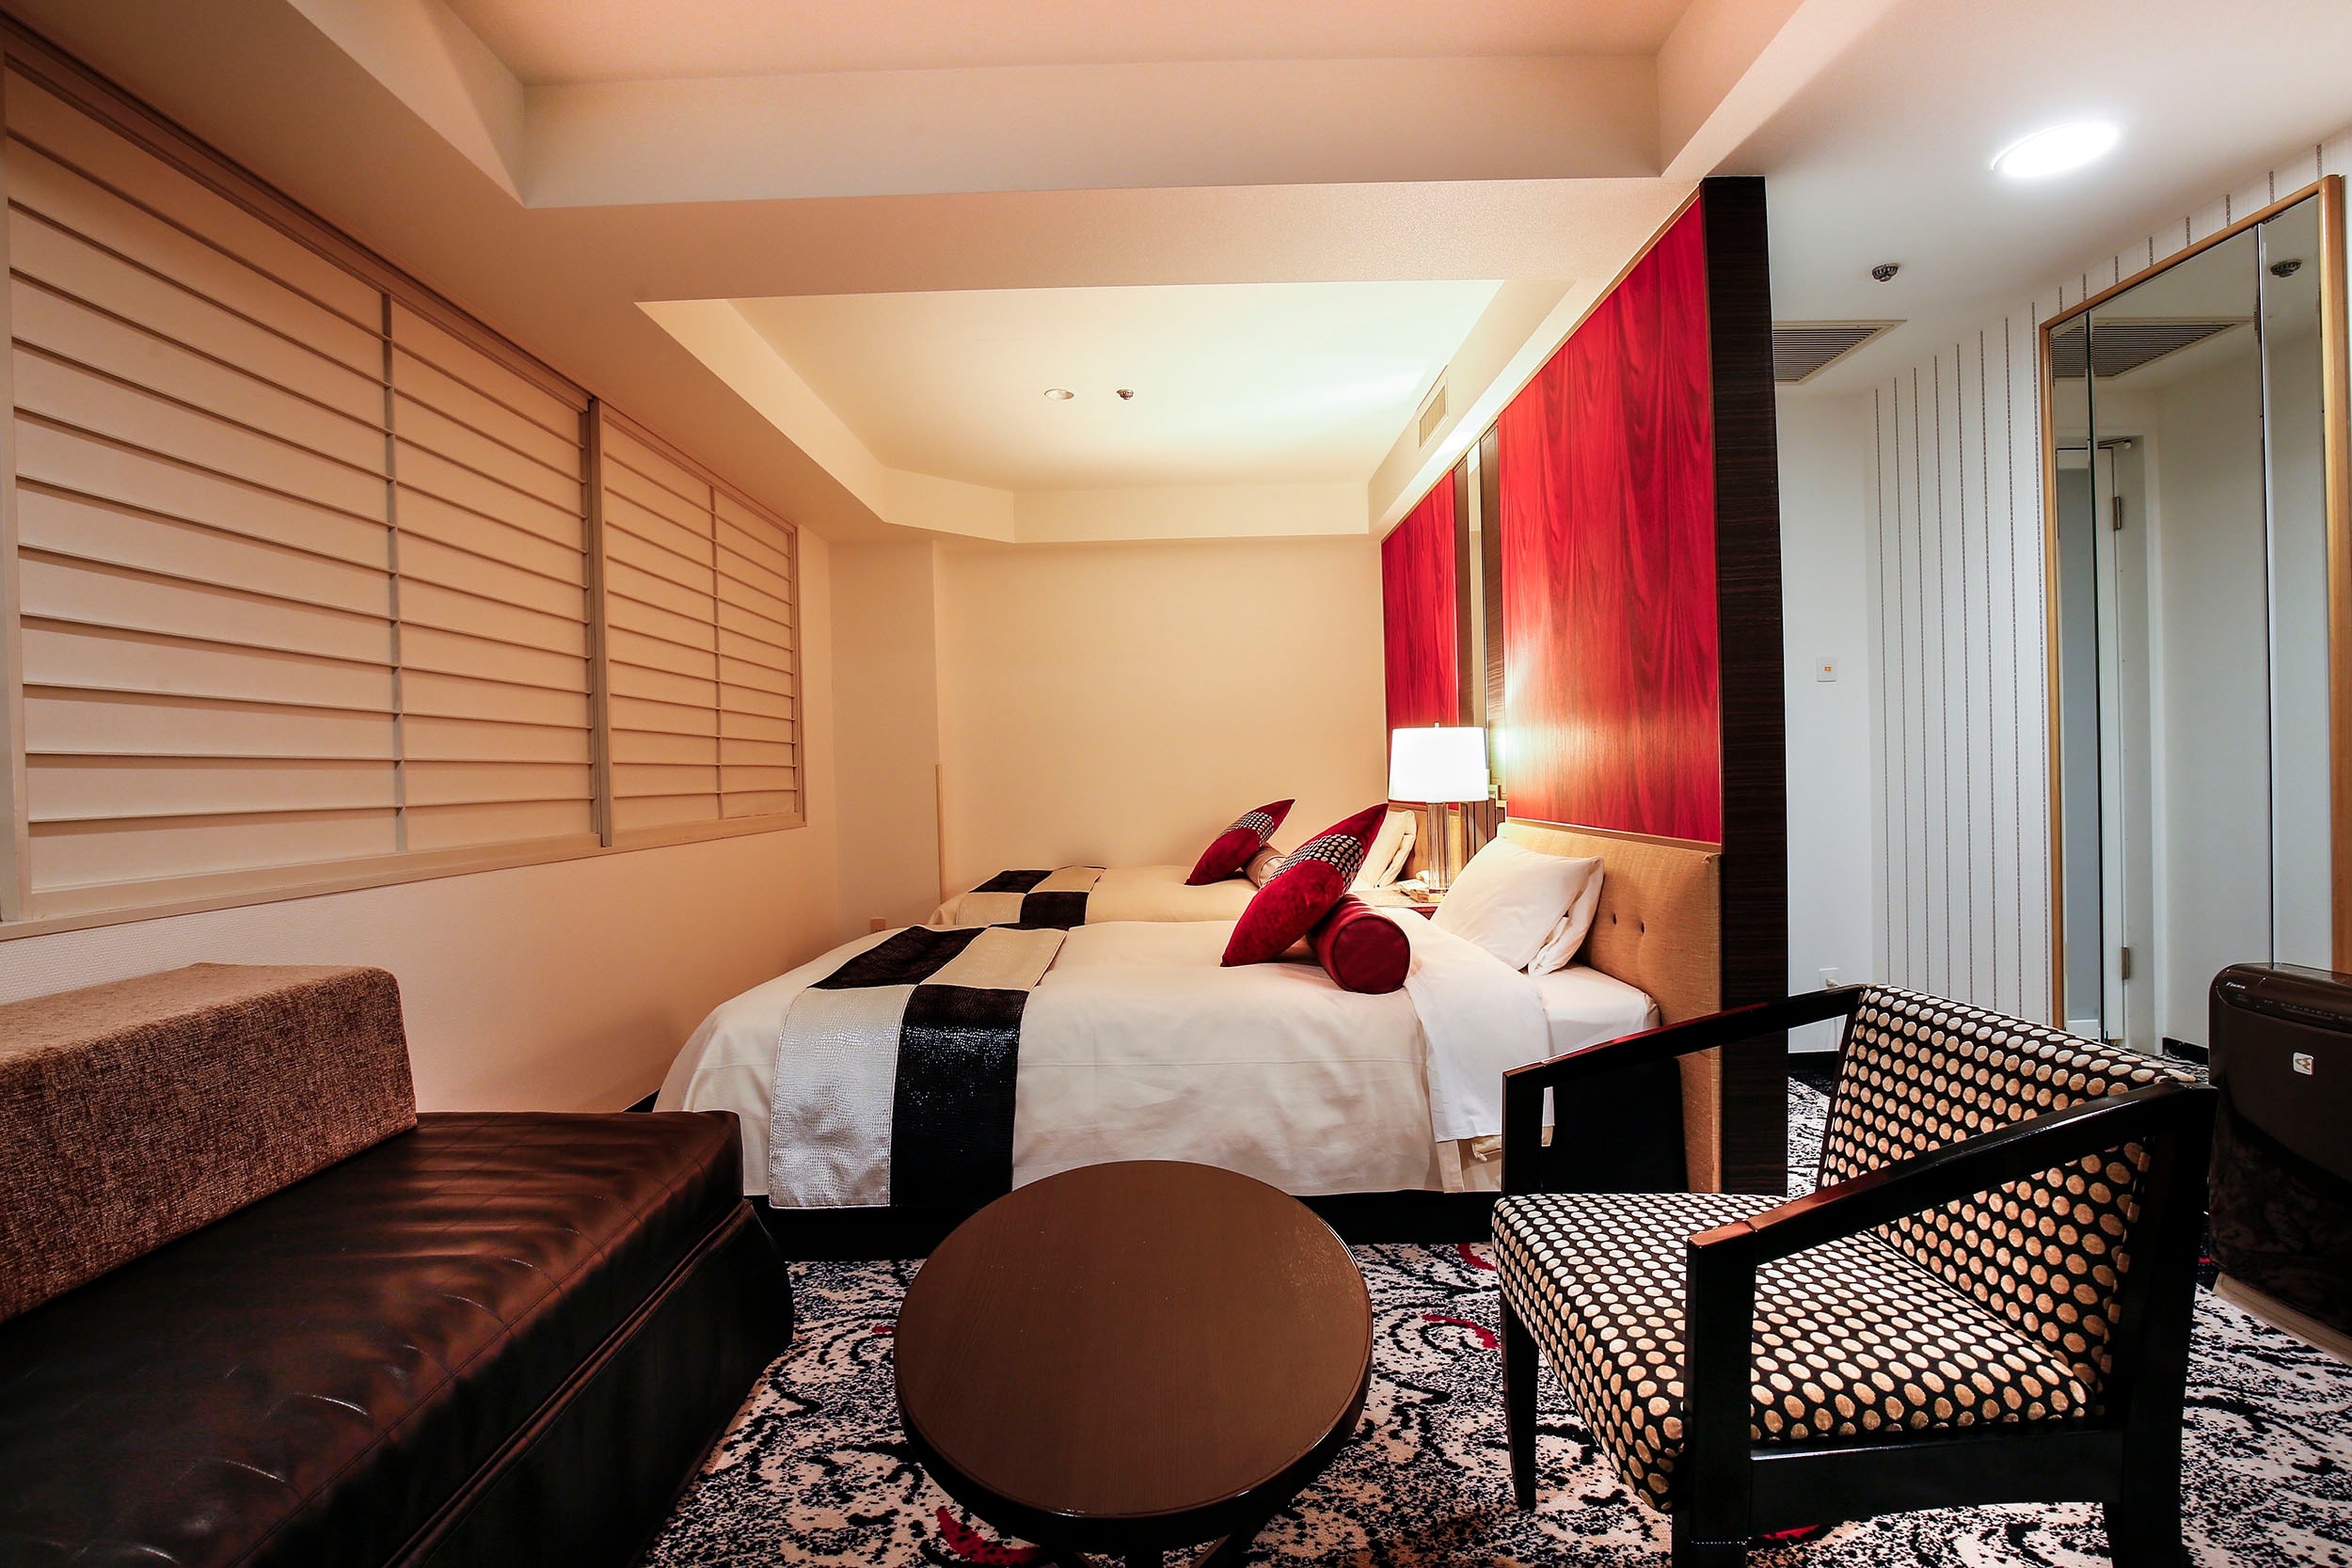 [Executive Deluxe] This room can be used for business or leisure, depending on your purpose.